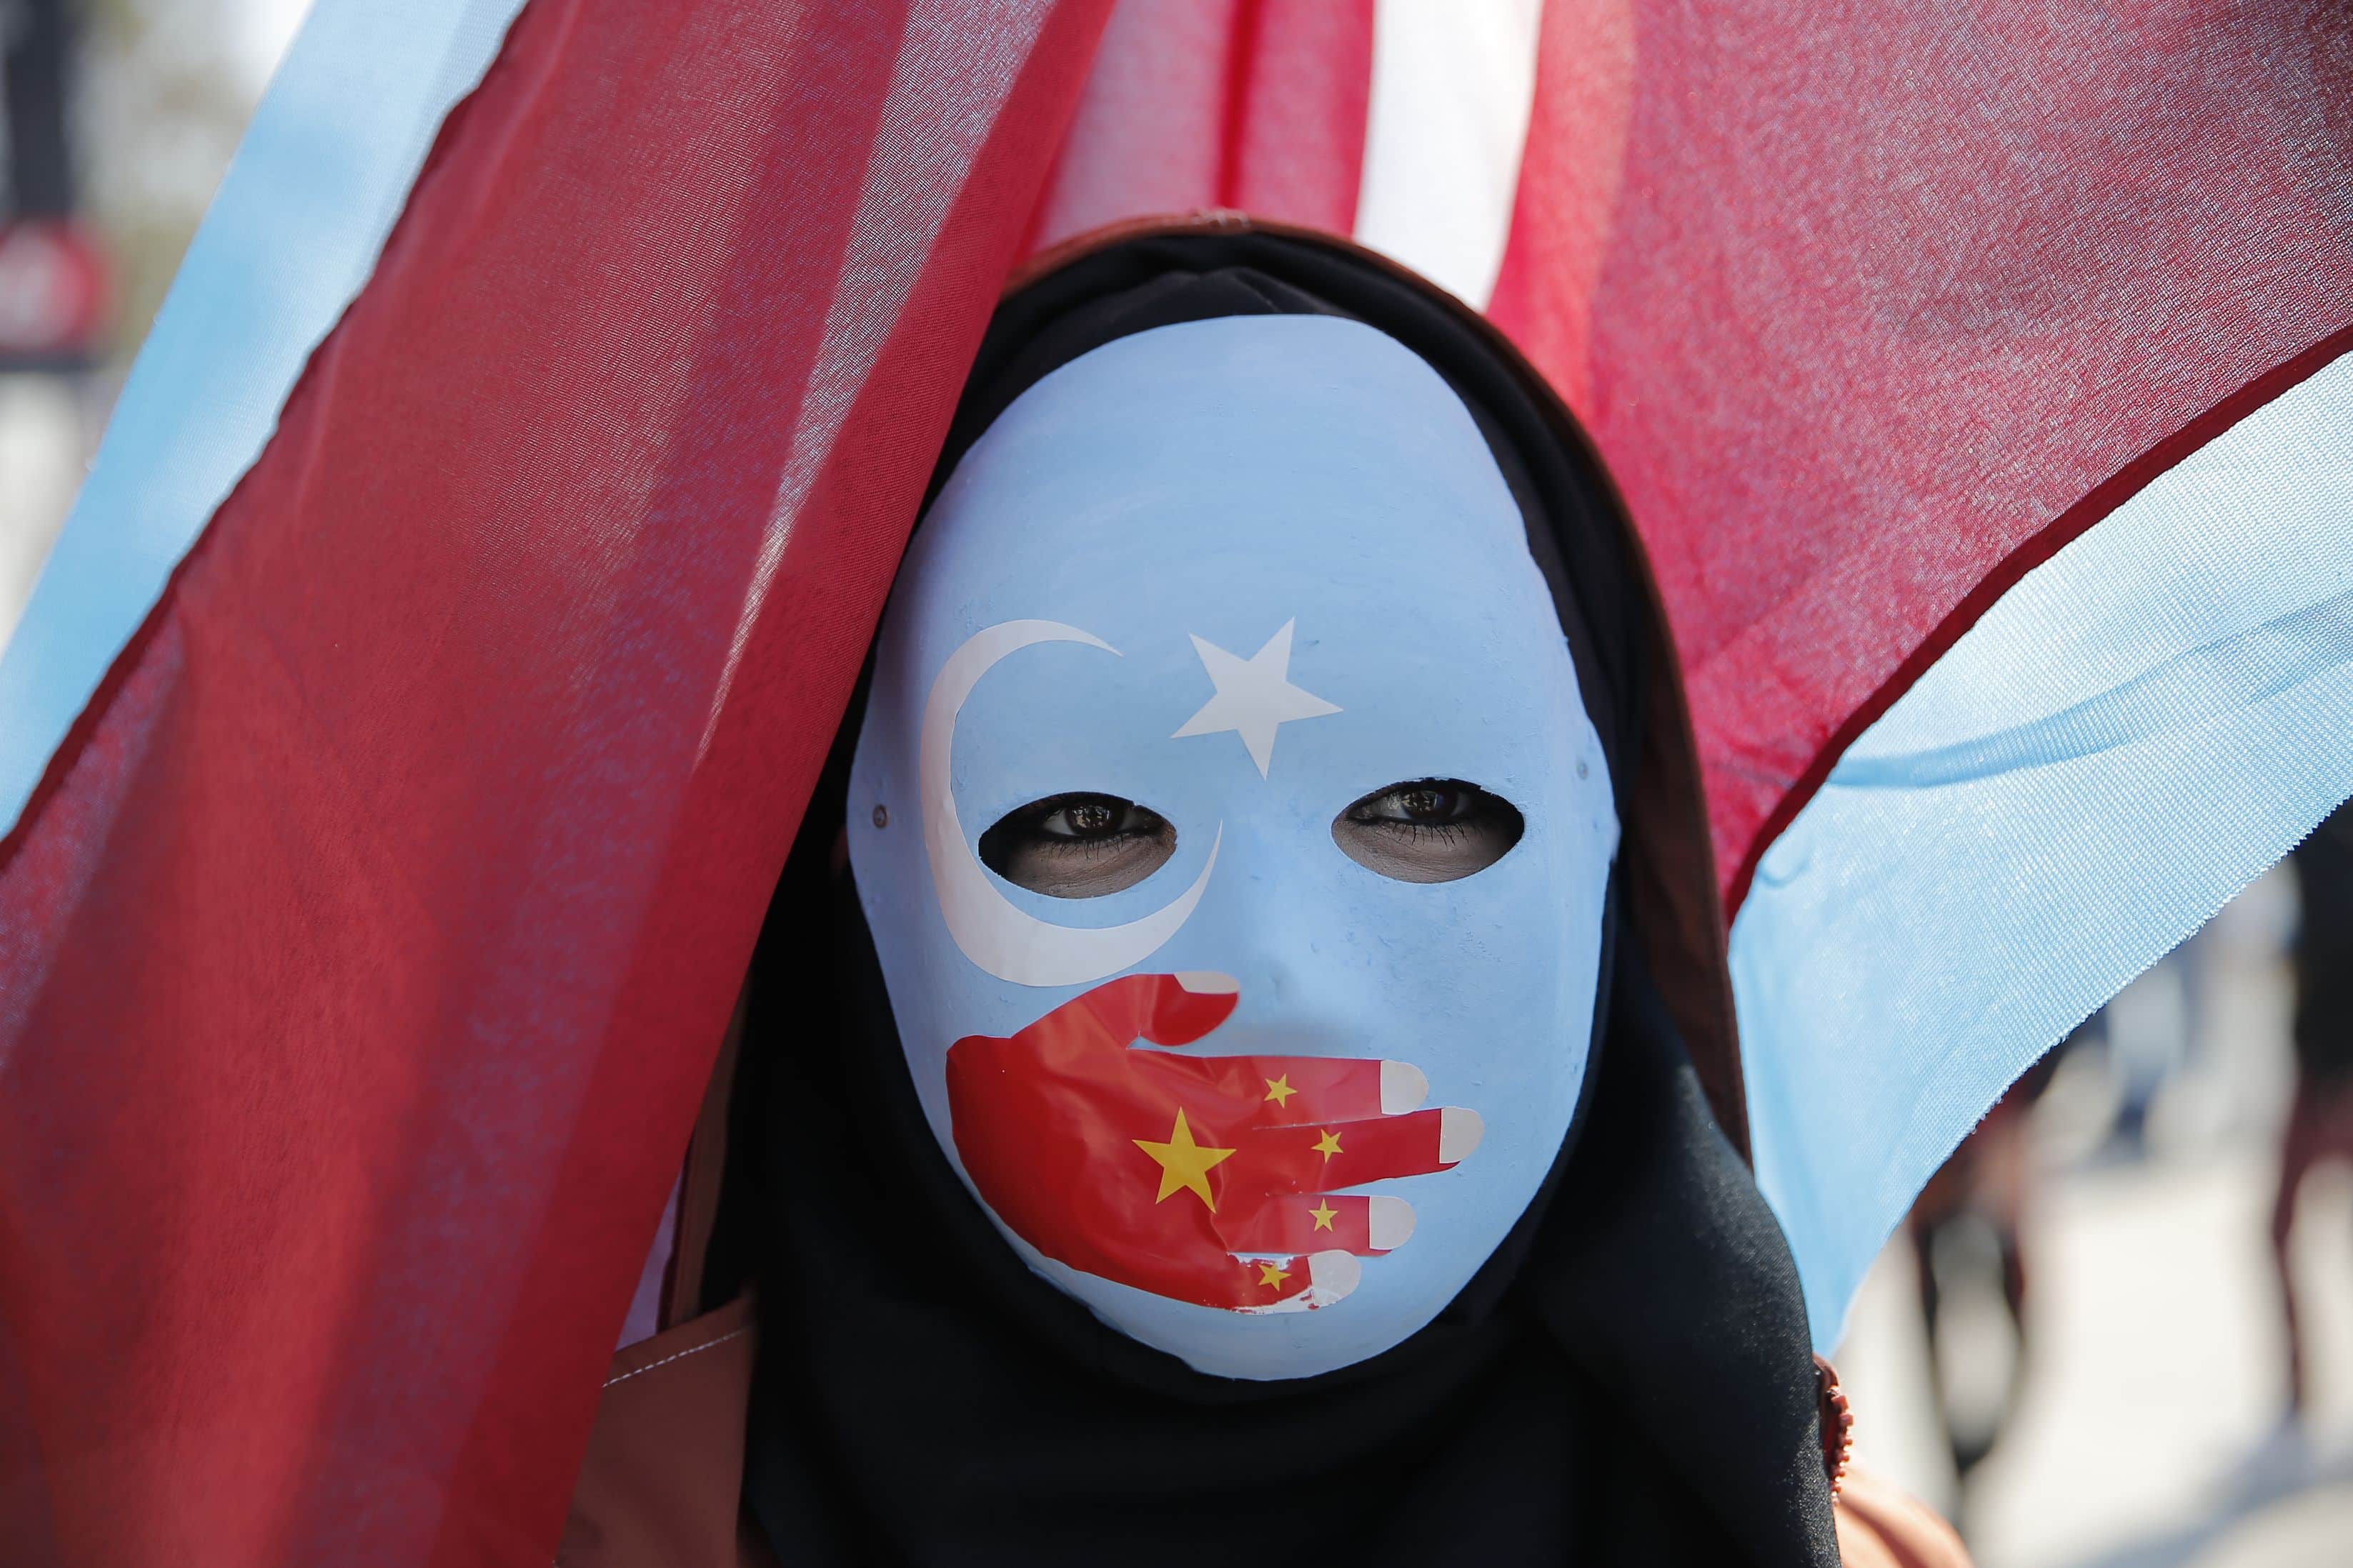 Ethnic Uighurs are seen during a protest against China near the Chinese Consulate in Istanbul, Turkey, December 15, 2019.